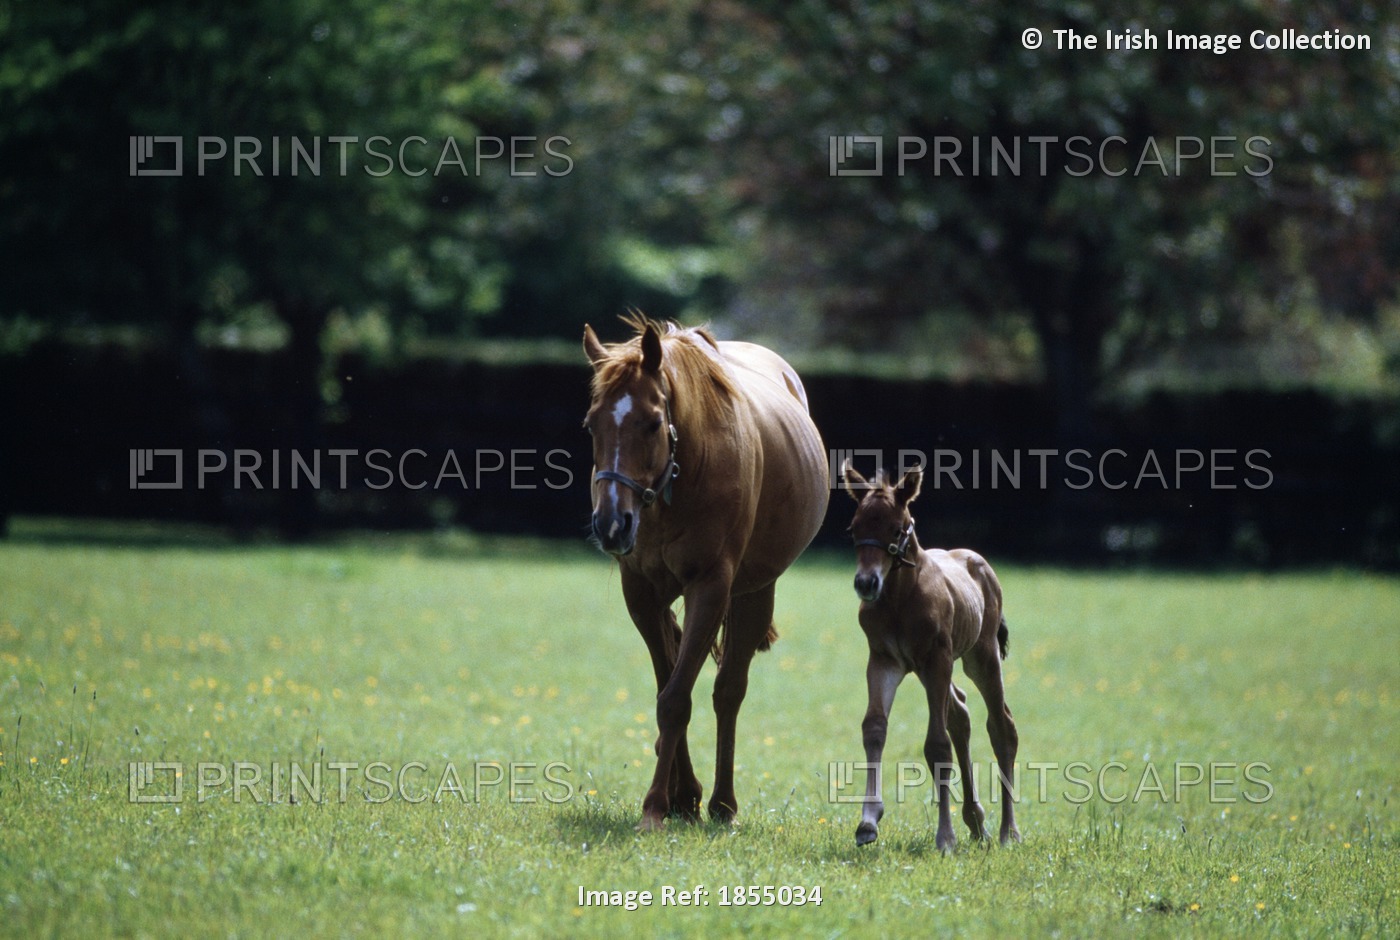 Horses - Thoroughbred, Mare And Foal; Ireland